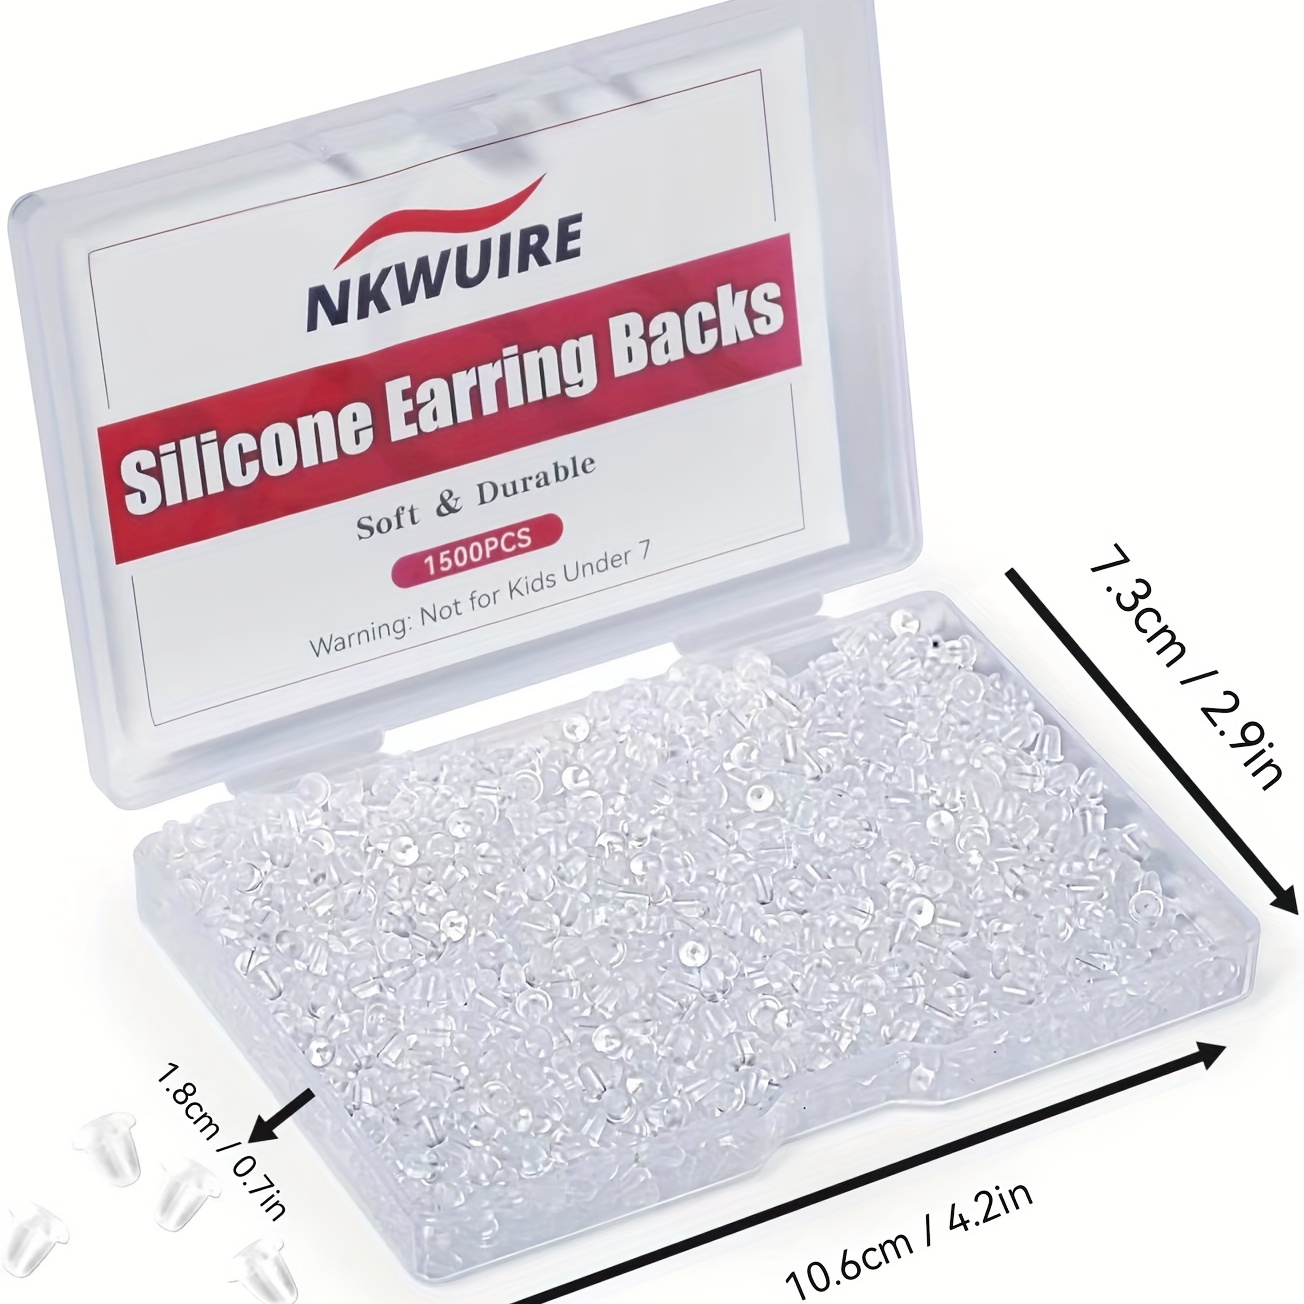 1500pcs Silicone Earring Backs For Studs, Soft Earring Backings Safe  Plastic Rubber Earring Backs For Fish Hook Earring Back Replacement With  Storage